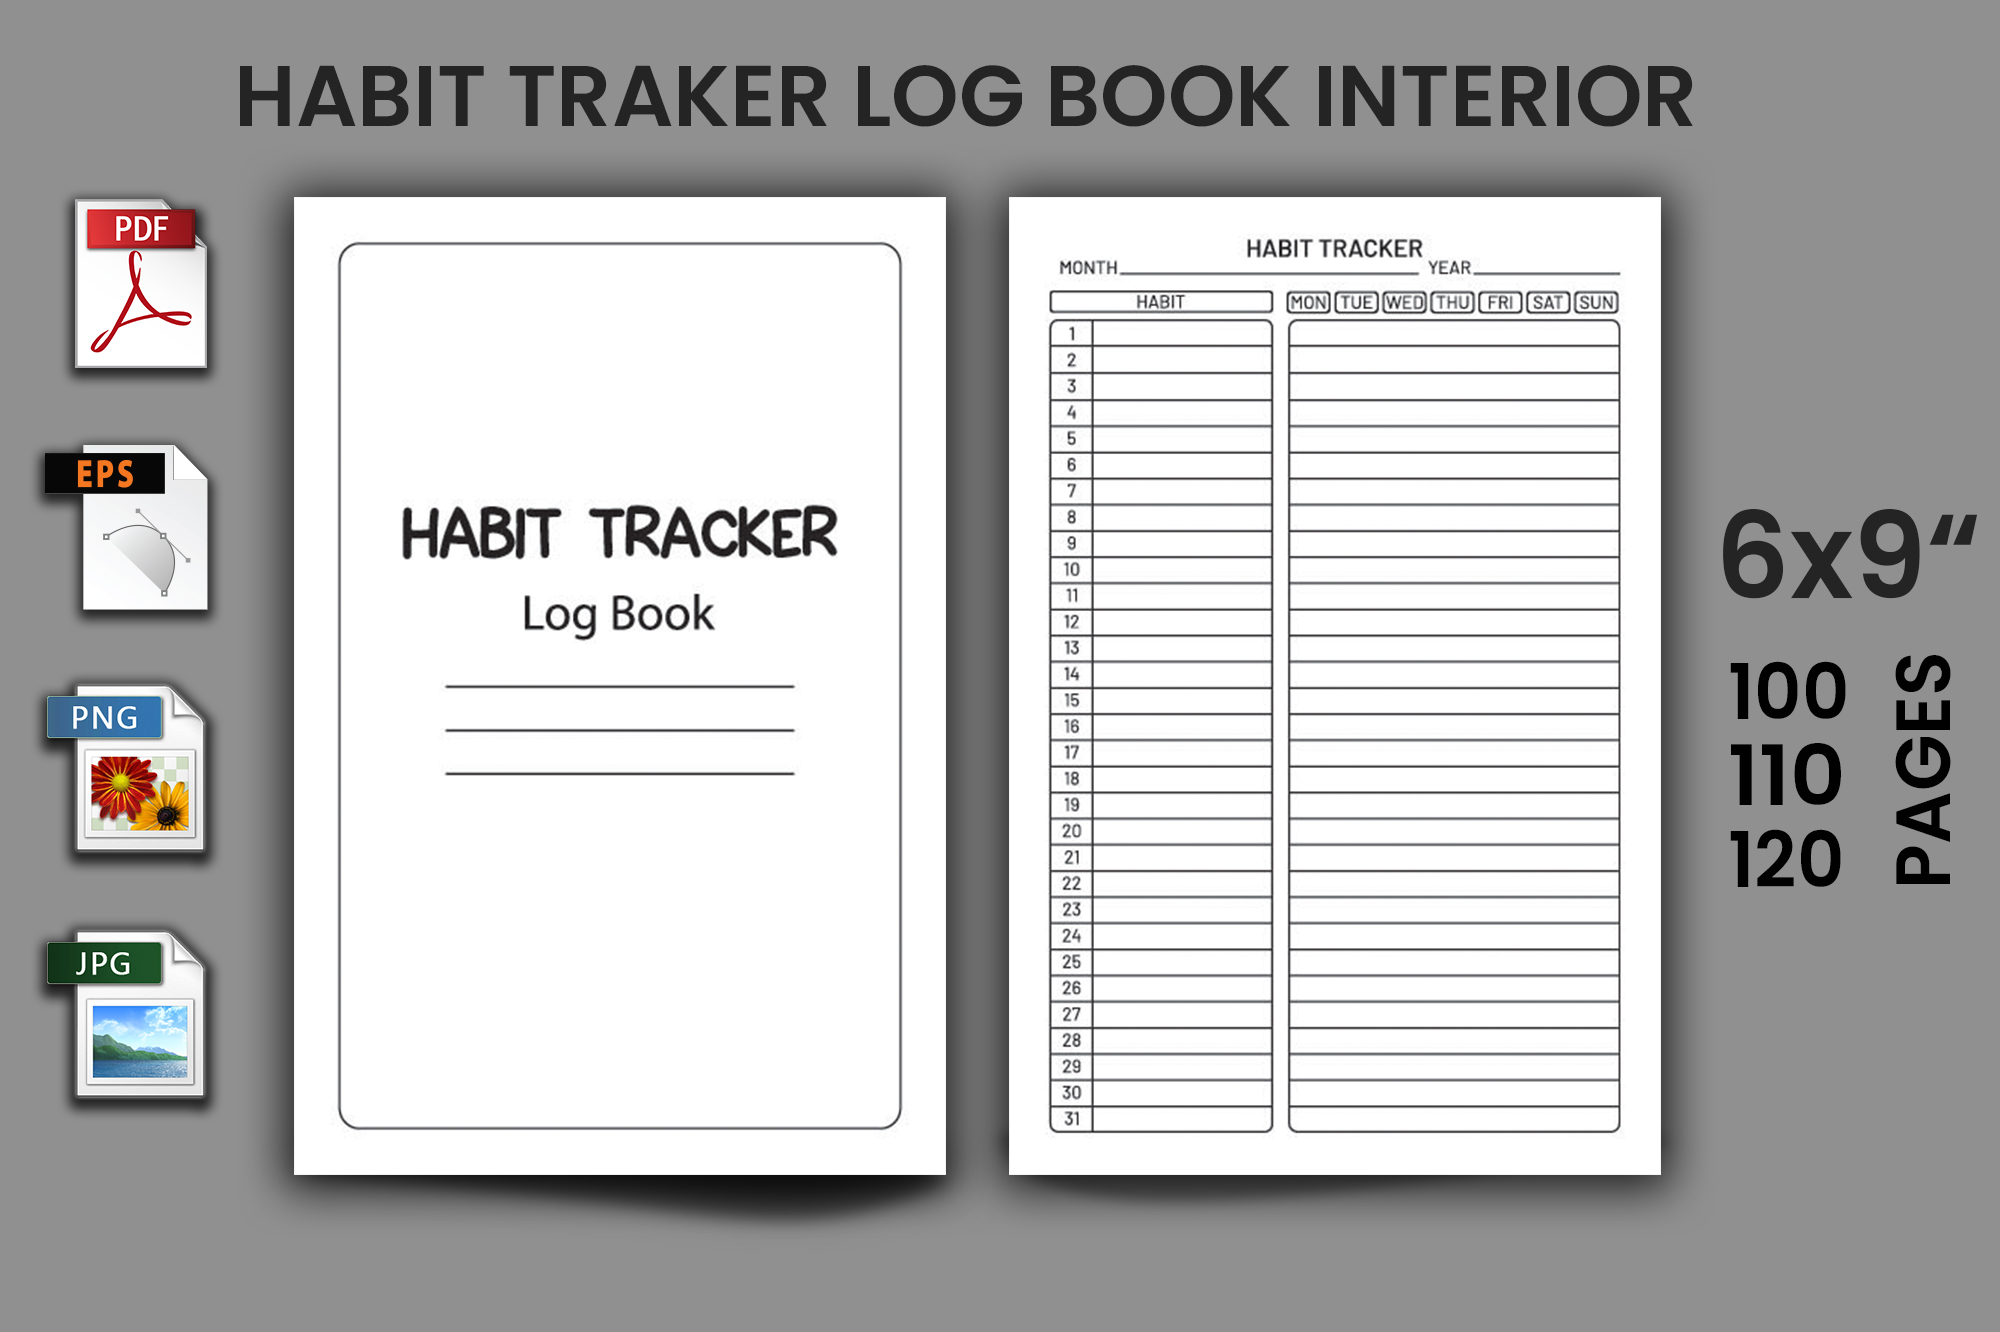 Habit tracker book with the text habit tracker.